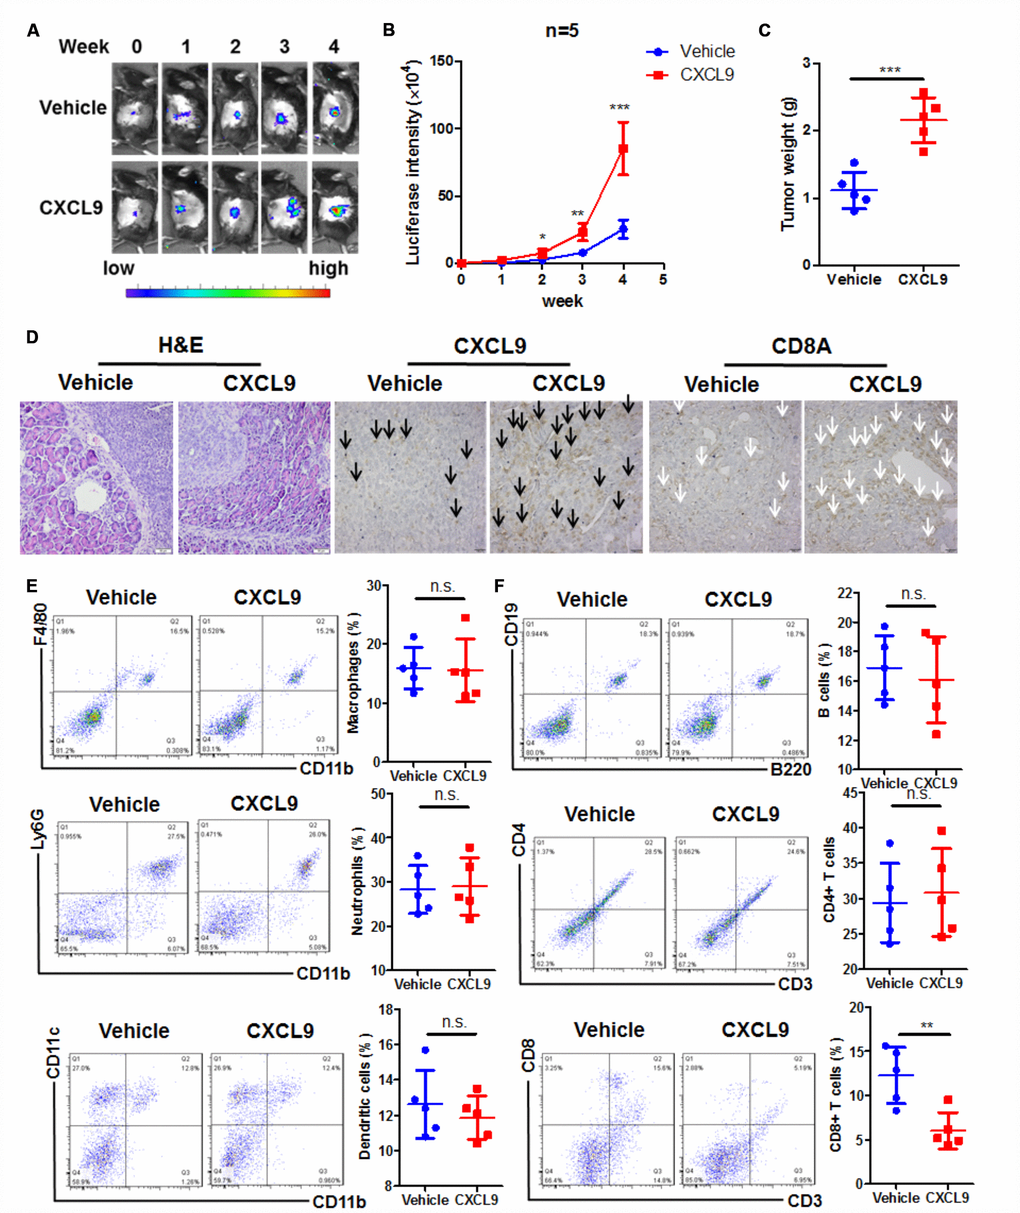 CXCL9 promoted tumour progression in murine orthotopic PAAD model. (A) showed CXCL9 accelerated tumour growth of orthotopic murine PAAD in mice; (B) showed the increased luciferin signals detected in mice was speeded up by CXCL9 treatment; (C) showed CXCL9 treatment increased tumour weight of orthotopic murine PAAD; (D) showed that CXCL9 treatment led to more aggressive pattern of tumour cells in orthotopic murine PAAD; immunohistological analysis confirmed that CXCL9 treatment could increase the intratumoral CXCL9 level (black arrow)while reduce the CD8+ cytotoxic T cells (white arrow); (E) showed that CXCL9 treatment had minimal effect on the pattern of innate immune cells in the tumour microenvironment; (F) showed that CXCL9 treatment significantly reduced the CD8+ cytotoxic T cells without affecting other adaptive immune cells in the tumour microenvironment of PAAD. *p